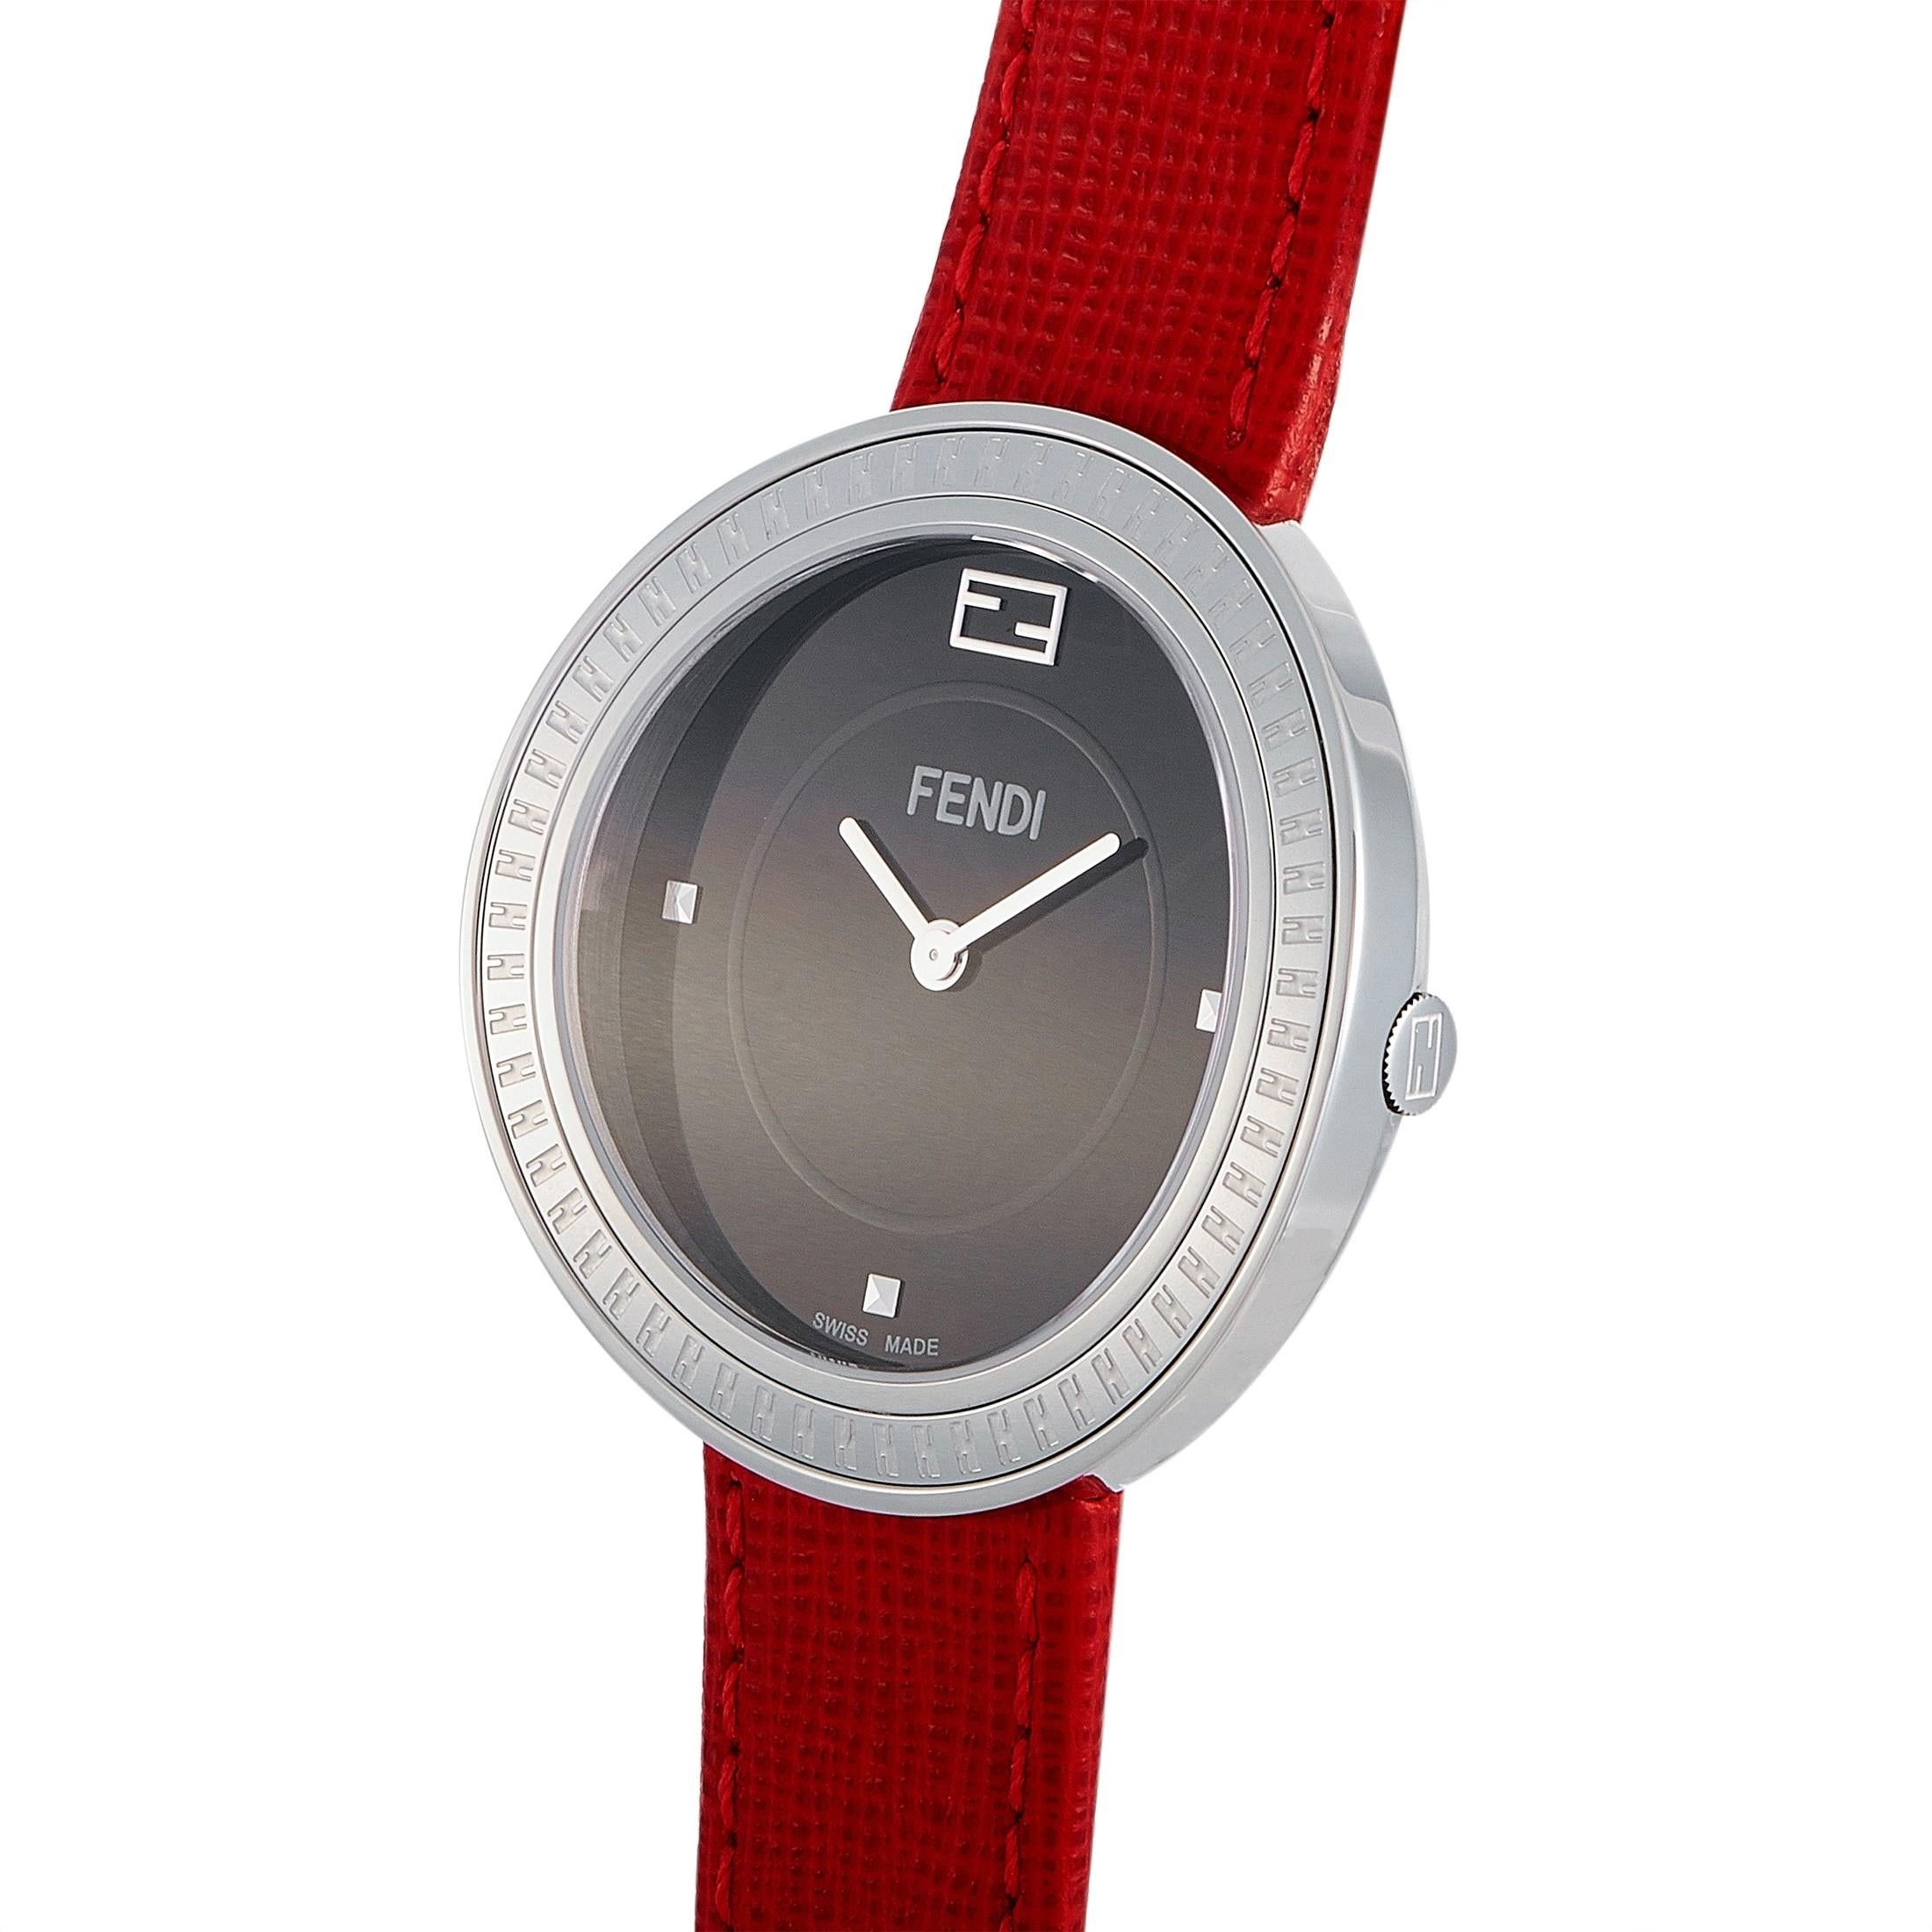 The Fendi My Way watch, reference number F354031073, boasts a 36 mm stainless steel case that is presented on a red leather strap, secured on the wrist with a tang buckle. This model is powered by a quartz movement and indicates hours and minutes on